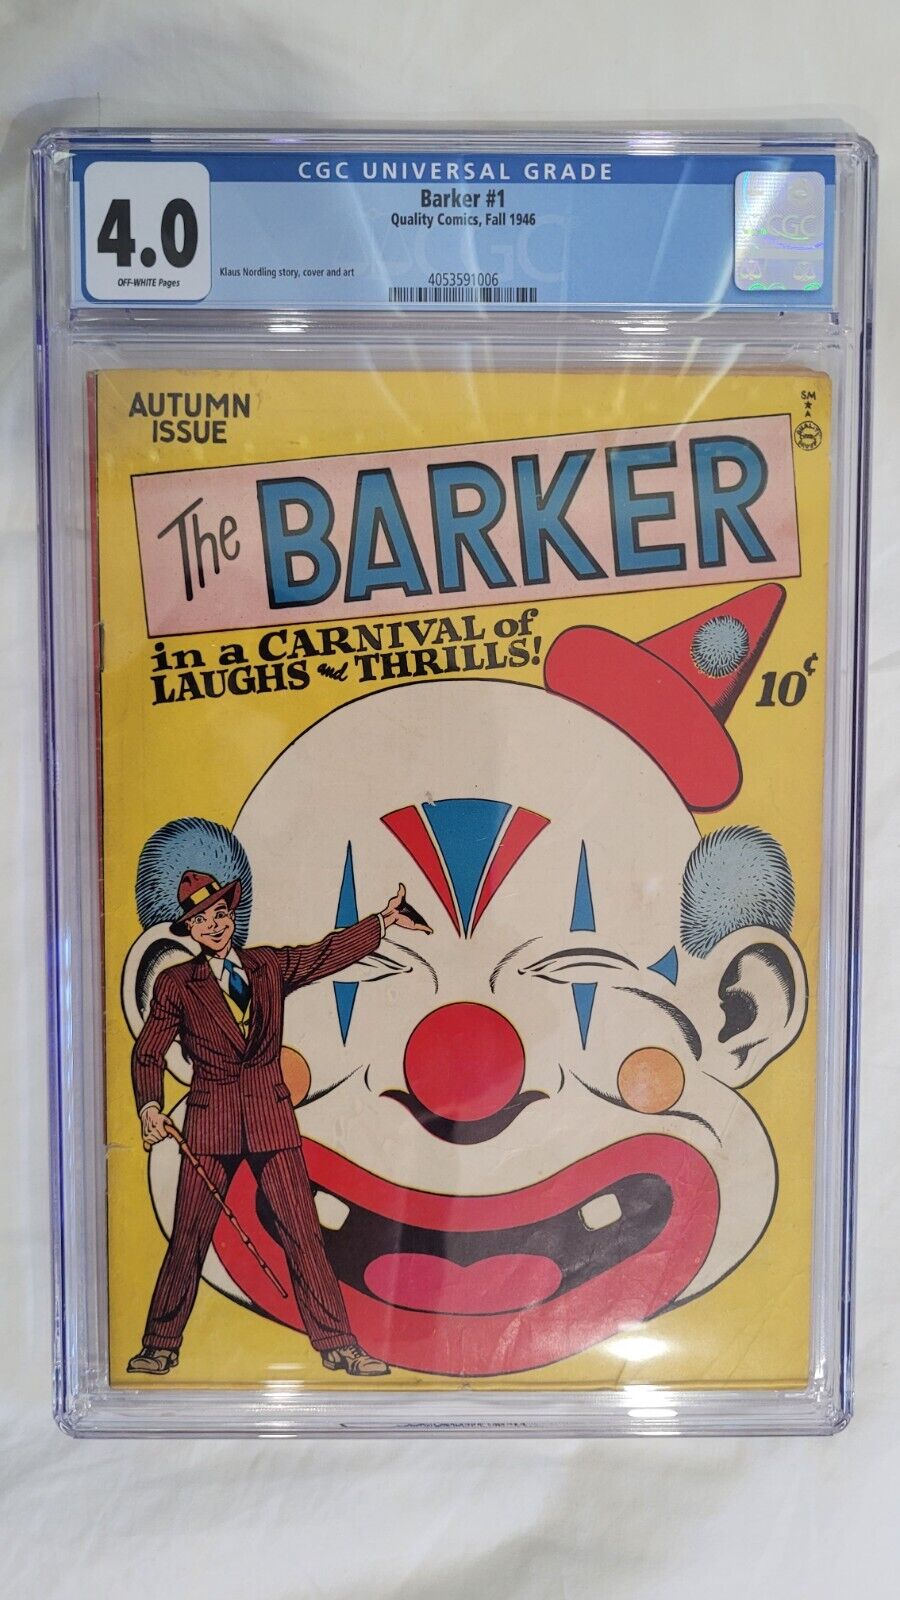 The Barker #1 (Fall 1946, Quality Comics) Golden Age CGC Graded (4.0)